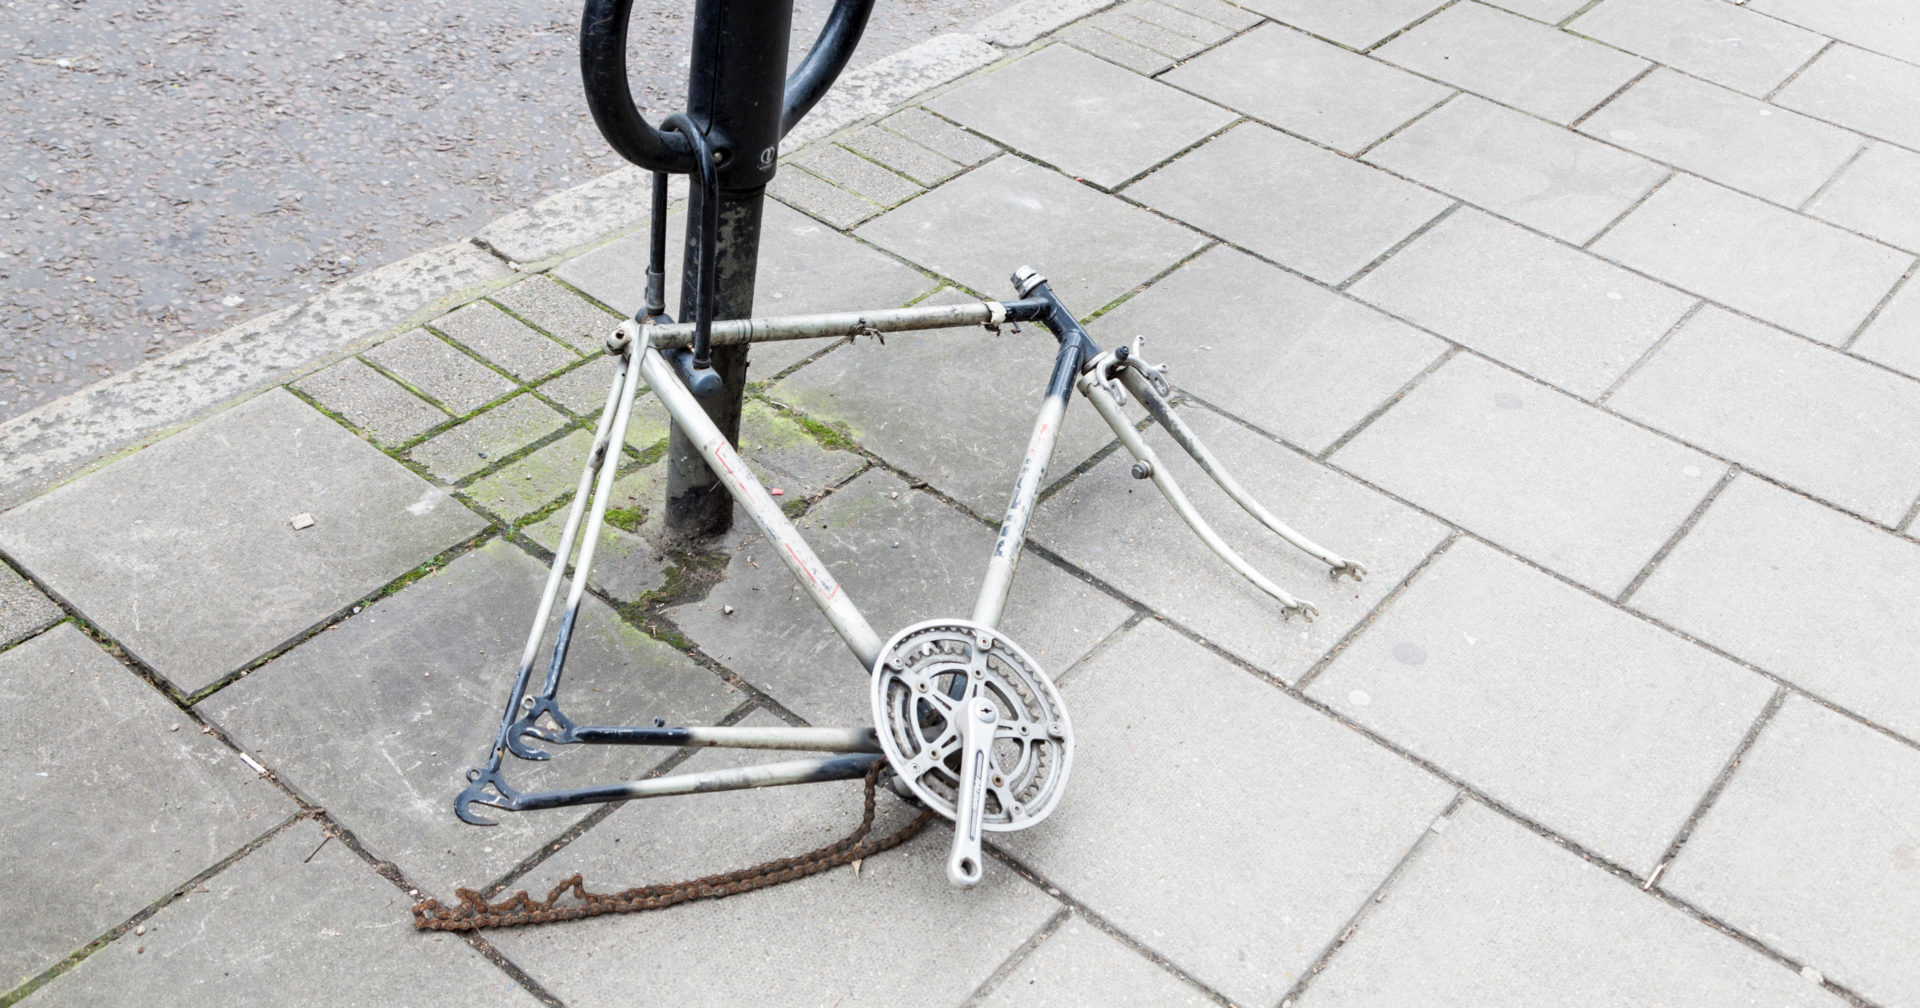 The frame of a locked bicycle left behind by thieves.